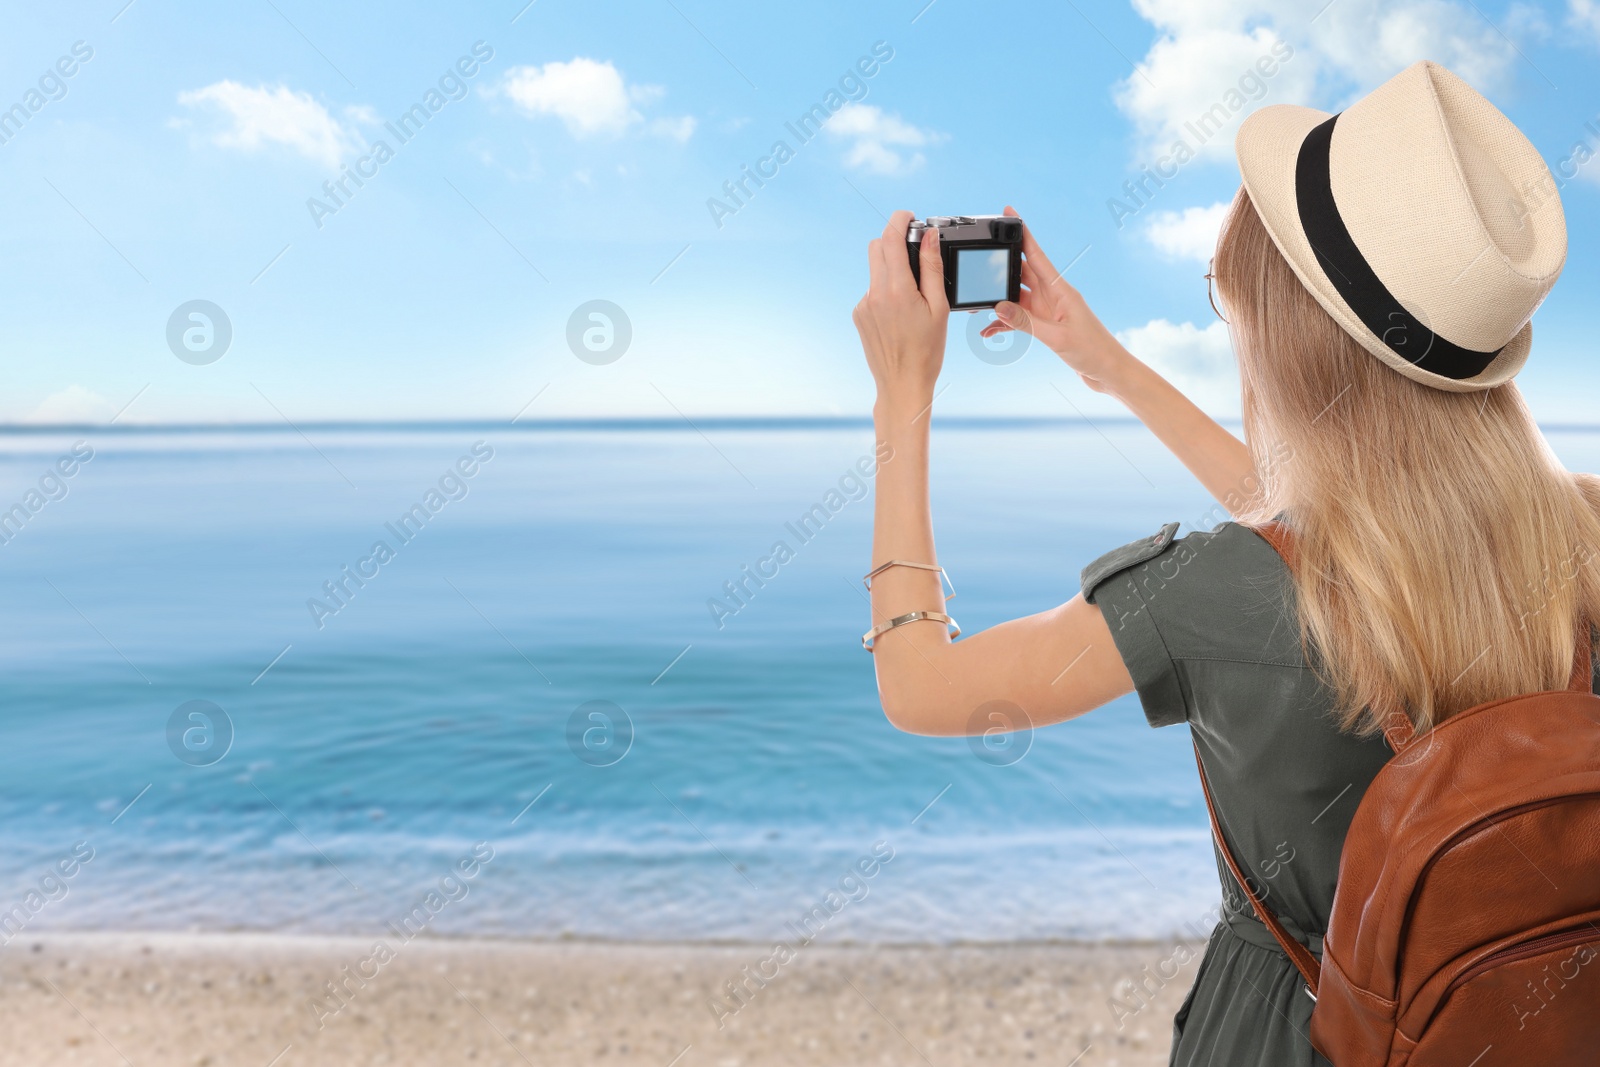 Image of Traveler taking photo on beach during summer vacation trip. Space for text